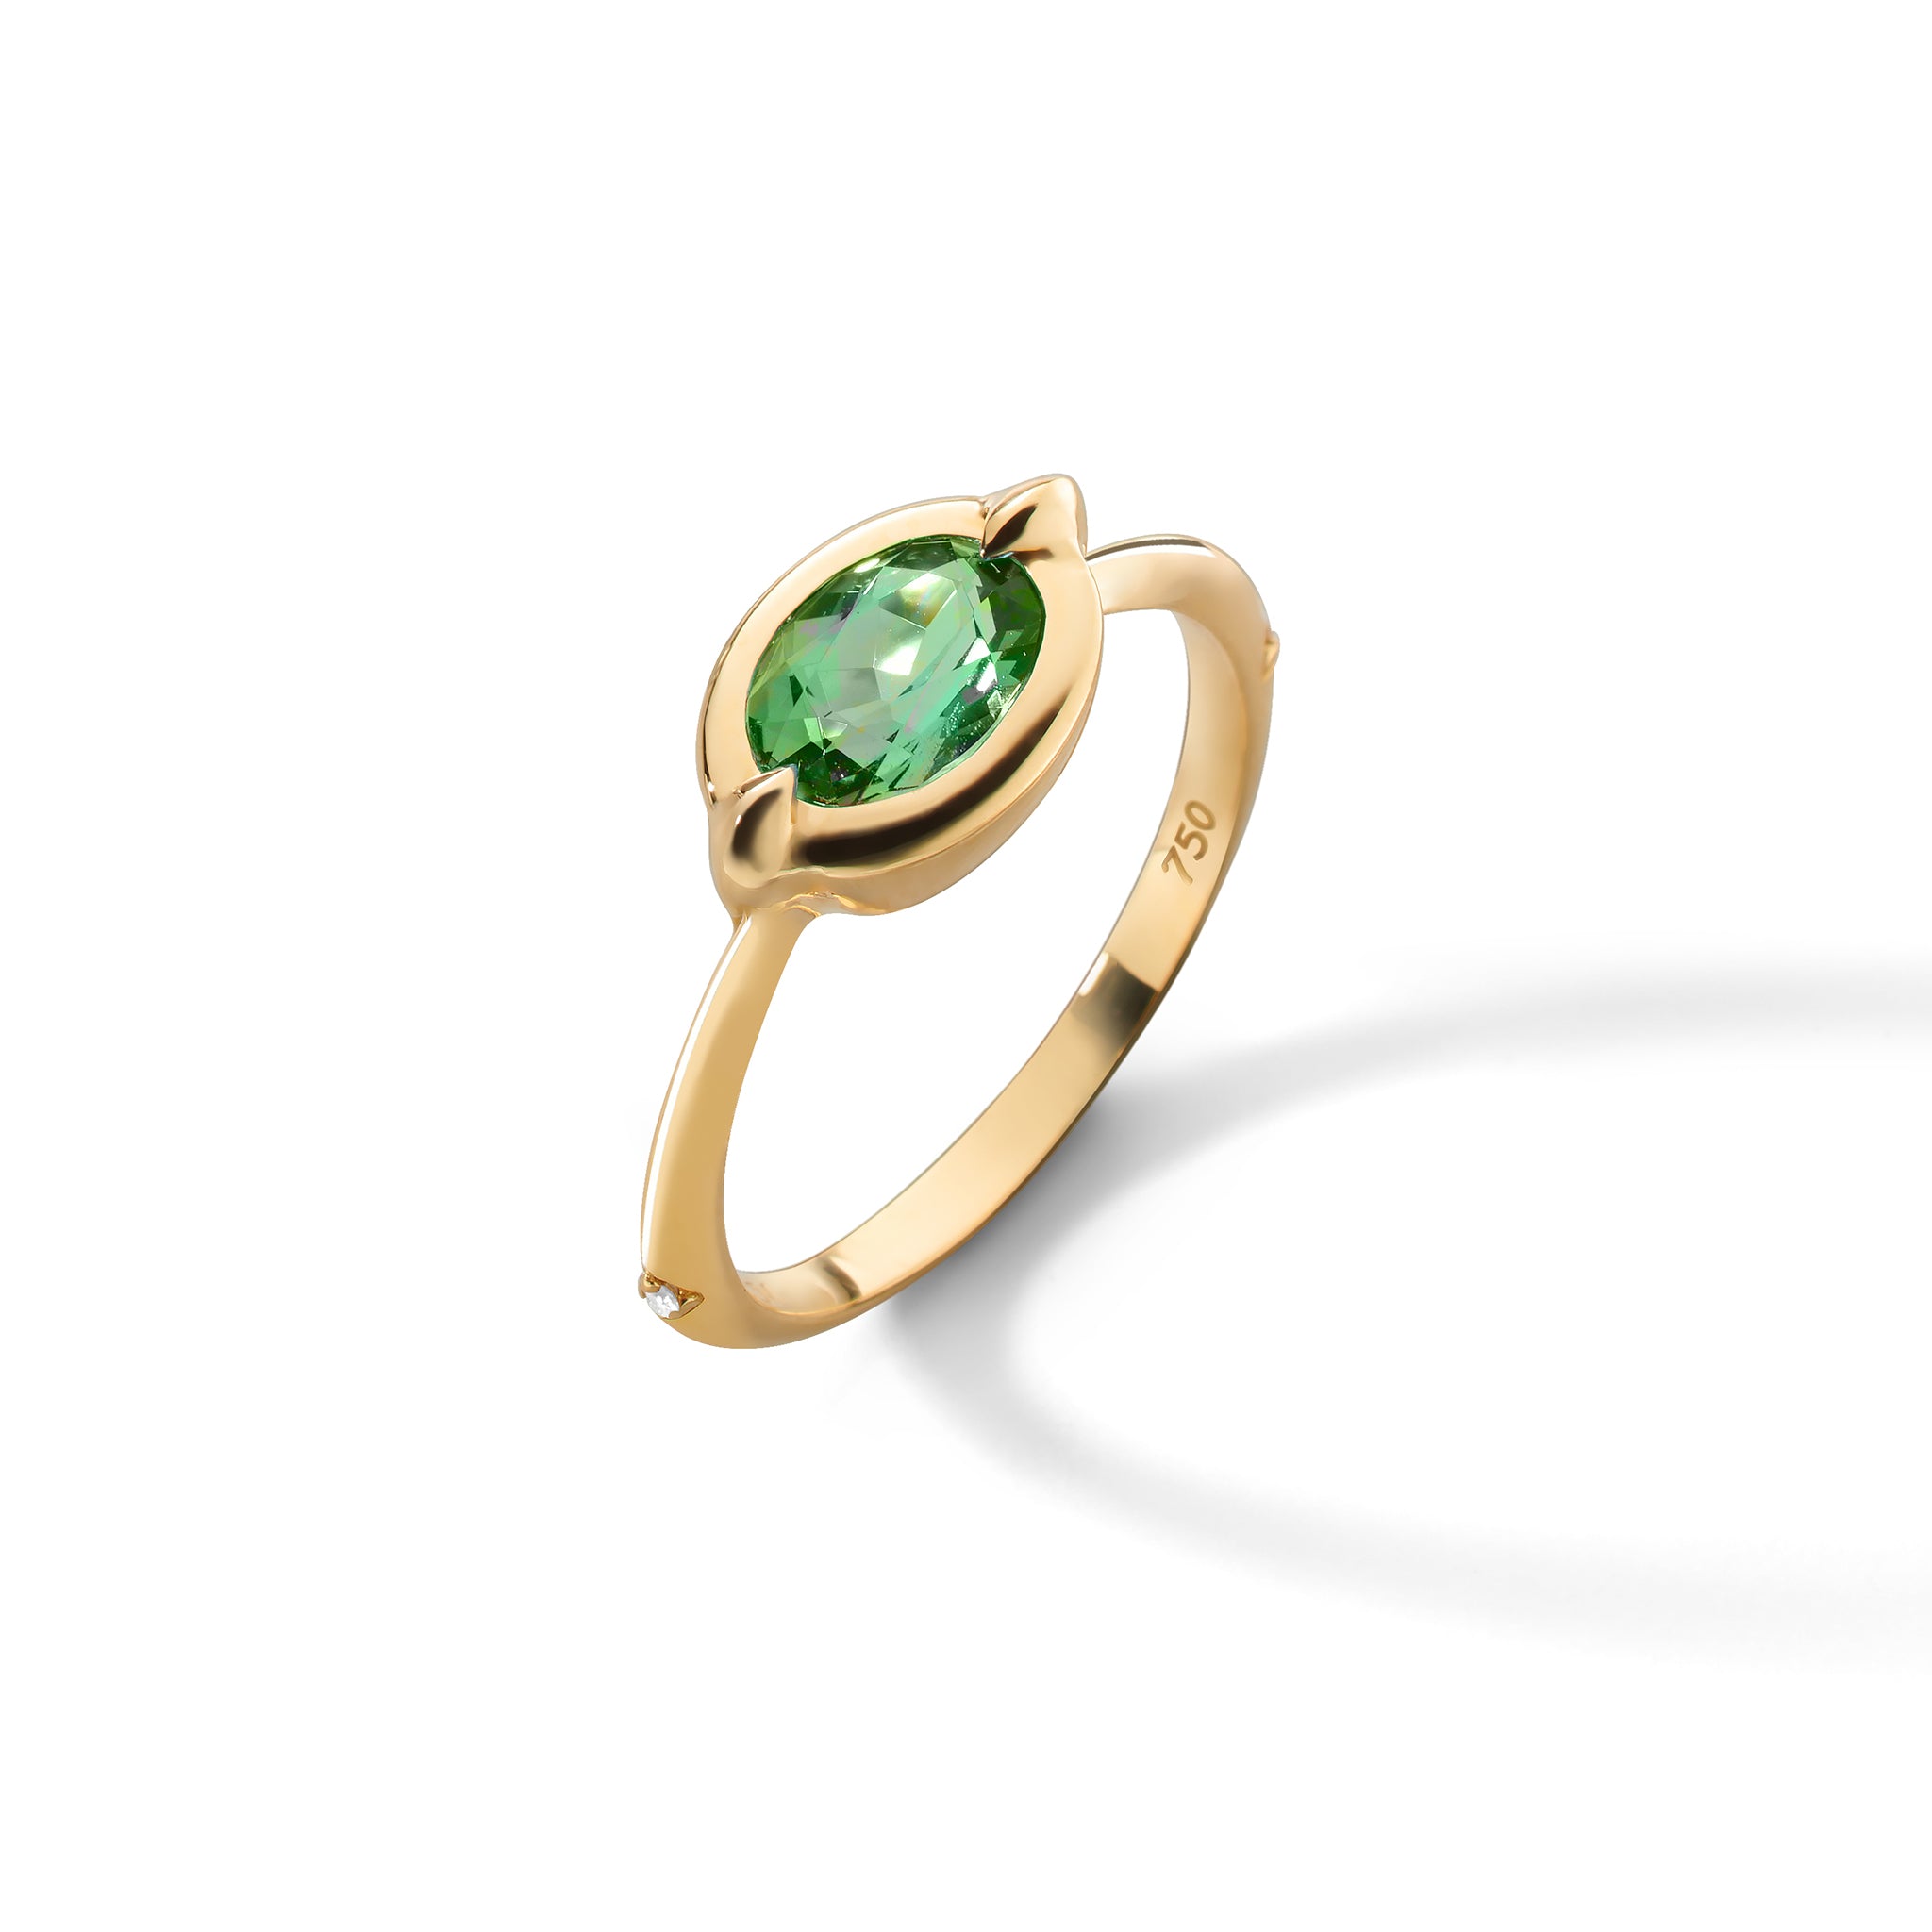 Lab Grown Emerald Ring, Emerald Jewelry, Yellow Gold Emerald Ring, May  Birthstone Ring, Vintage Ring, Gold Emerald Solitaire Ring, - Etsy |  Emerald jewelry, Emerald ring, Emerald ring gold